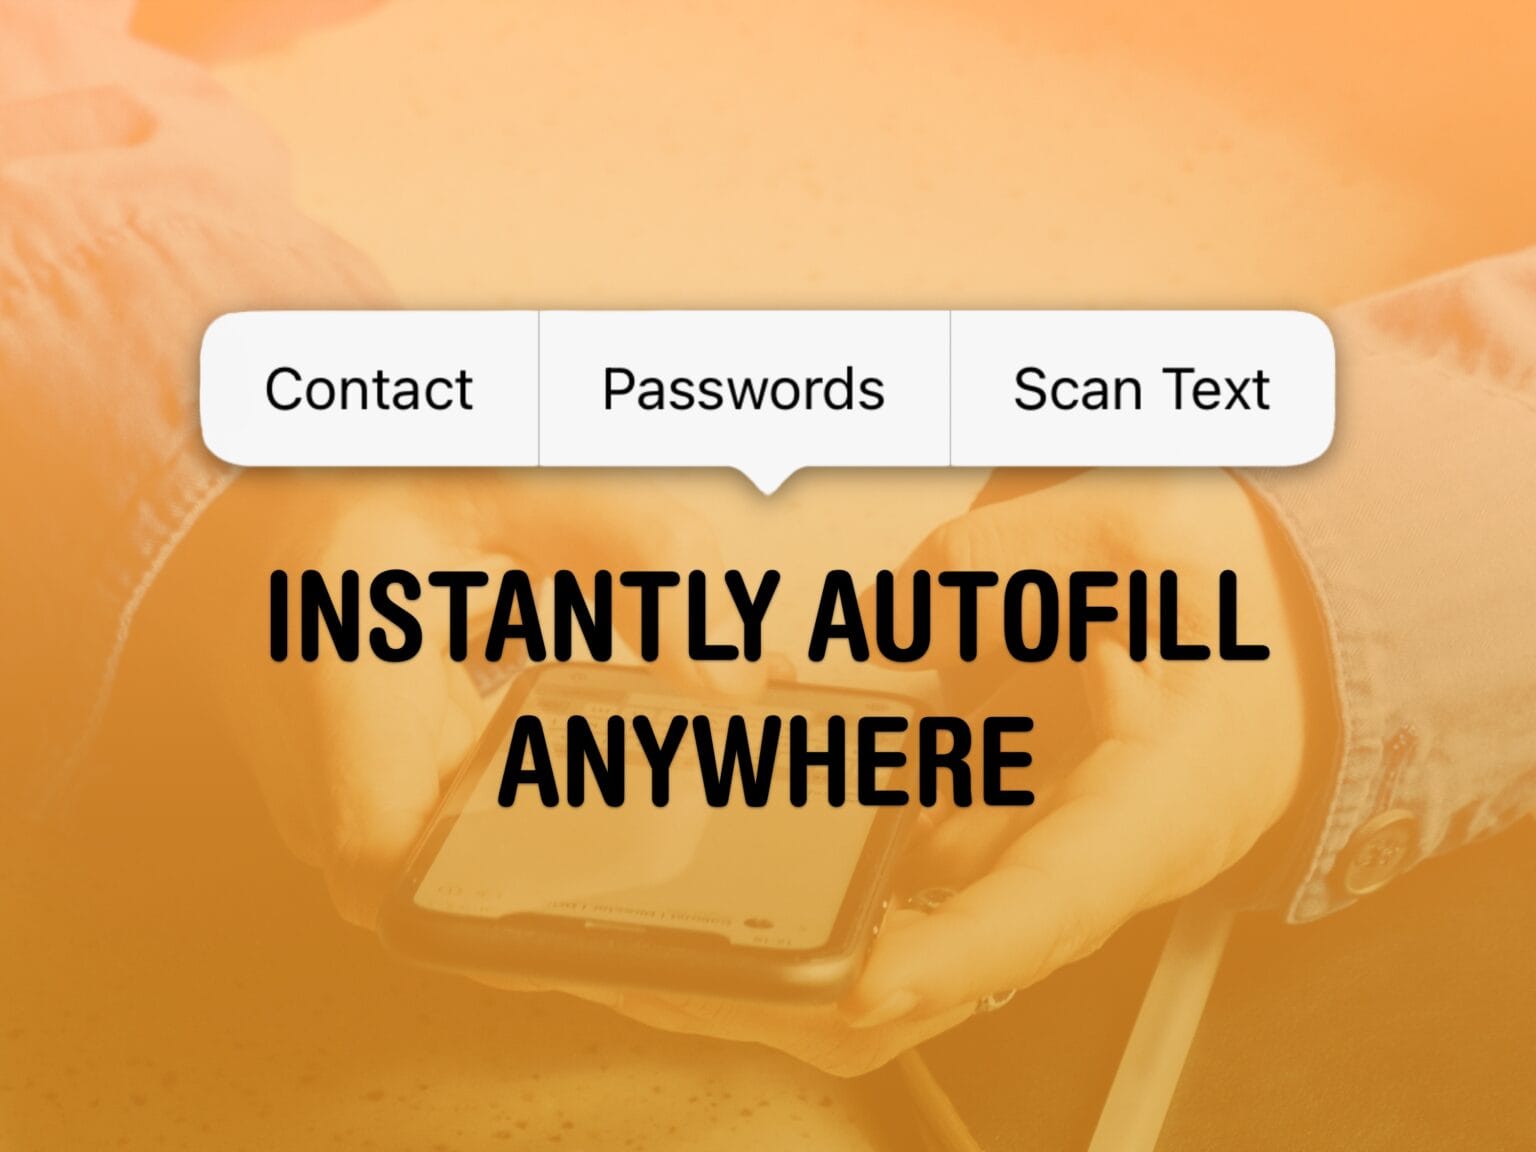 Instantly Autofill Anywhere